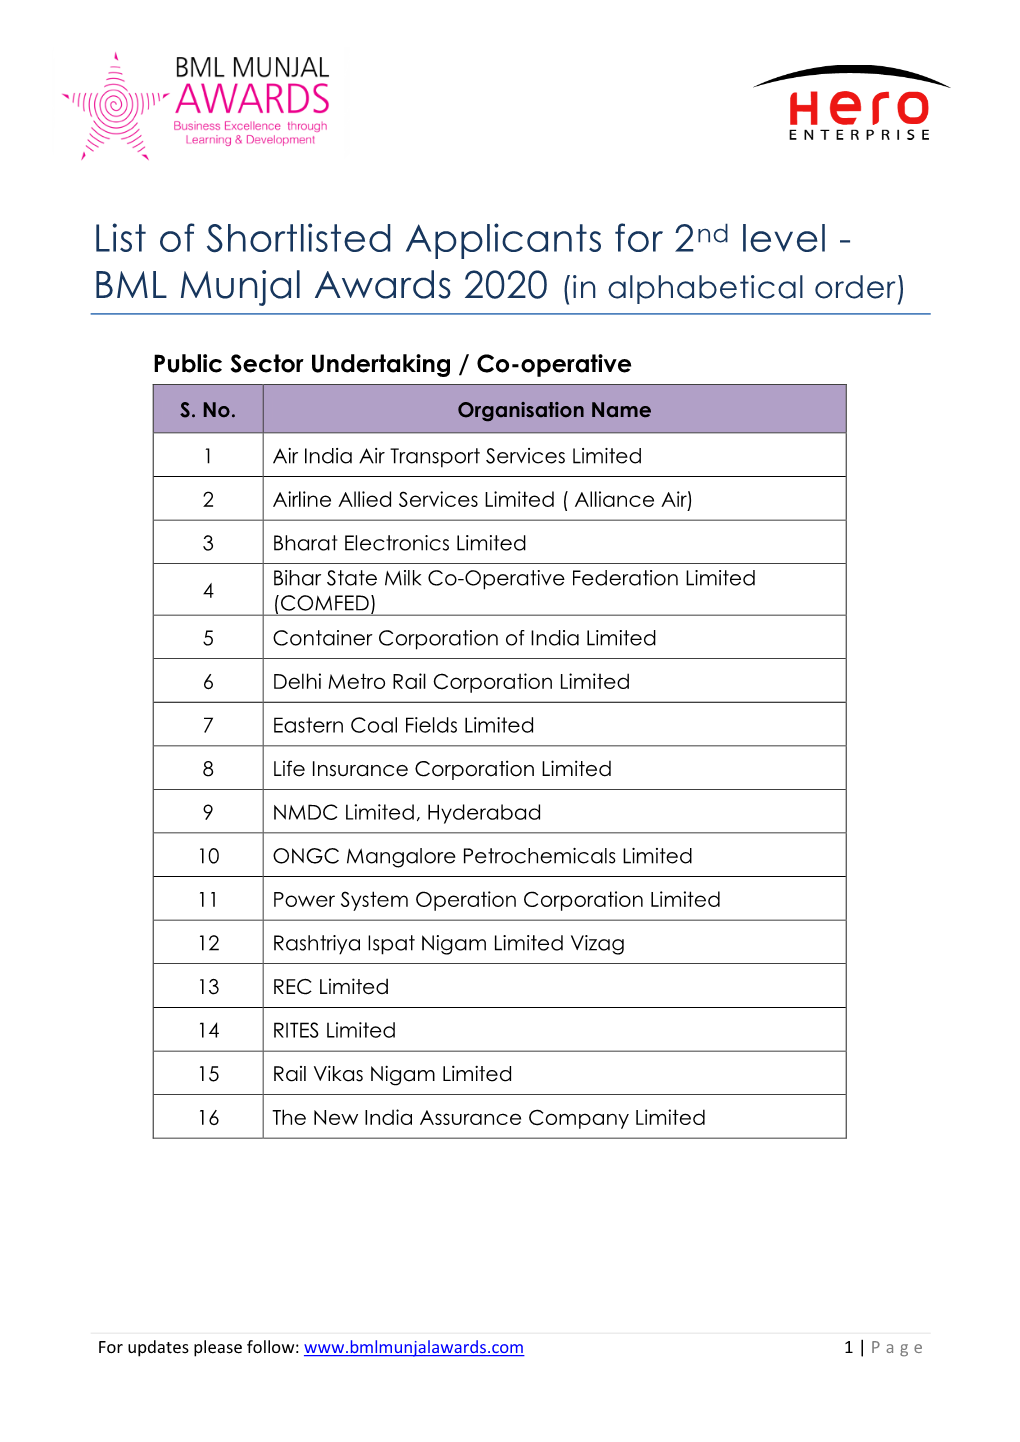 List of Shortlisted Applicants for 2Nd Level - BML Munjal Awards 2020 (In Alphabetical Order)